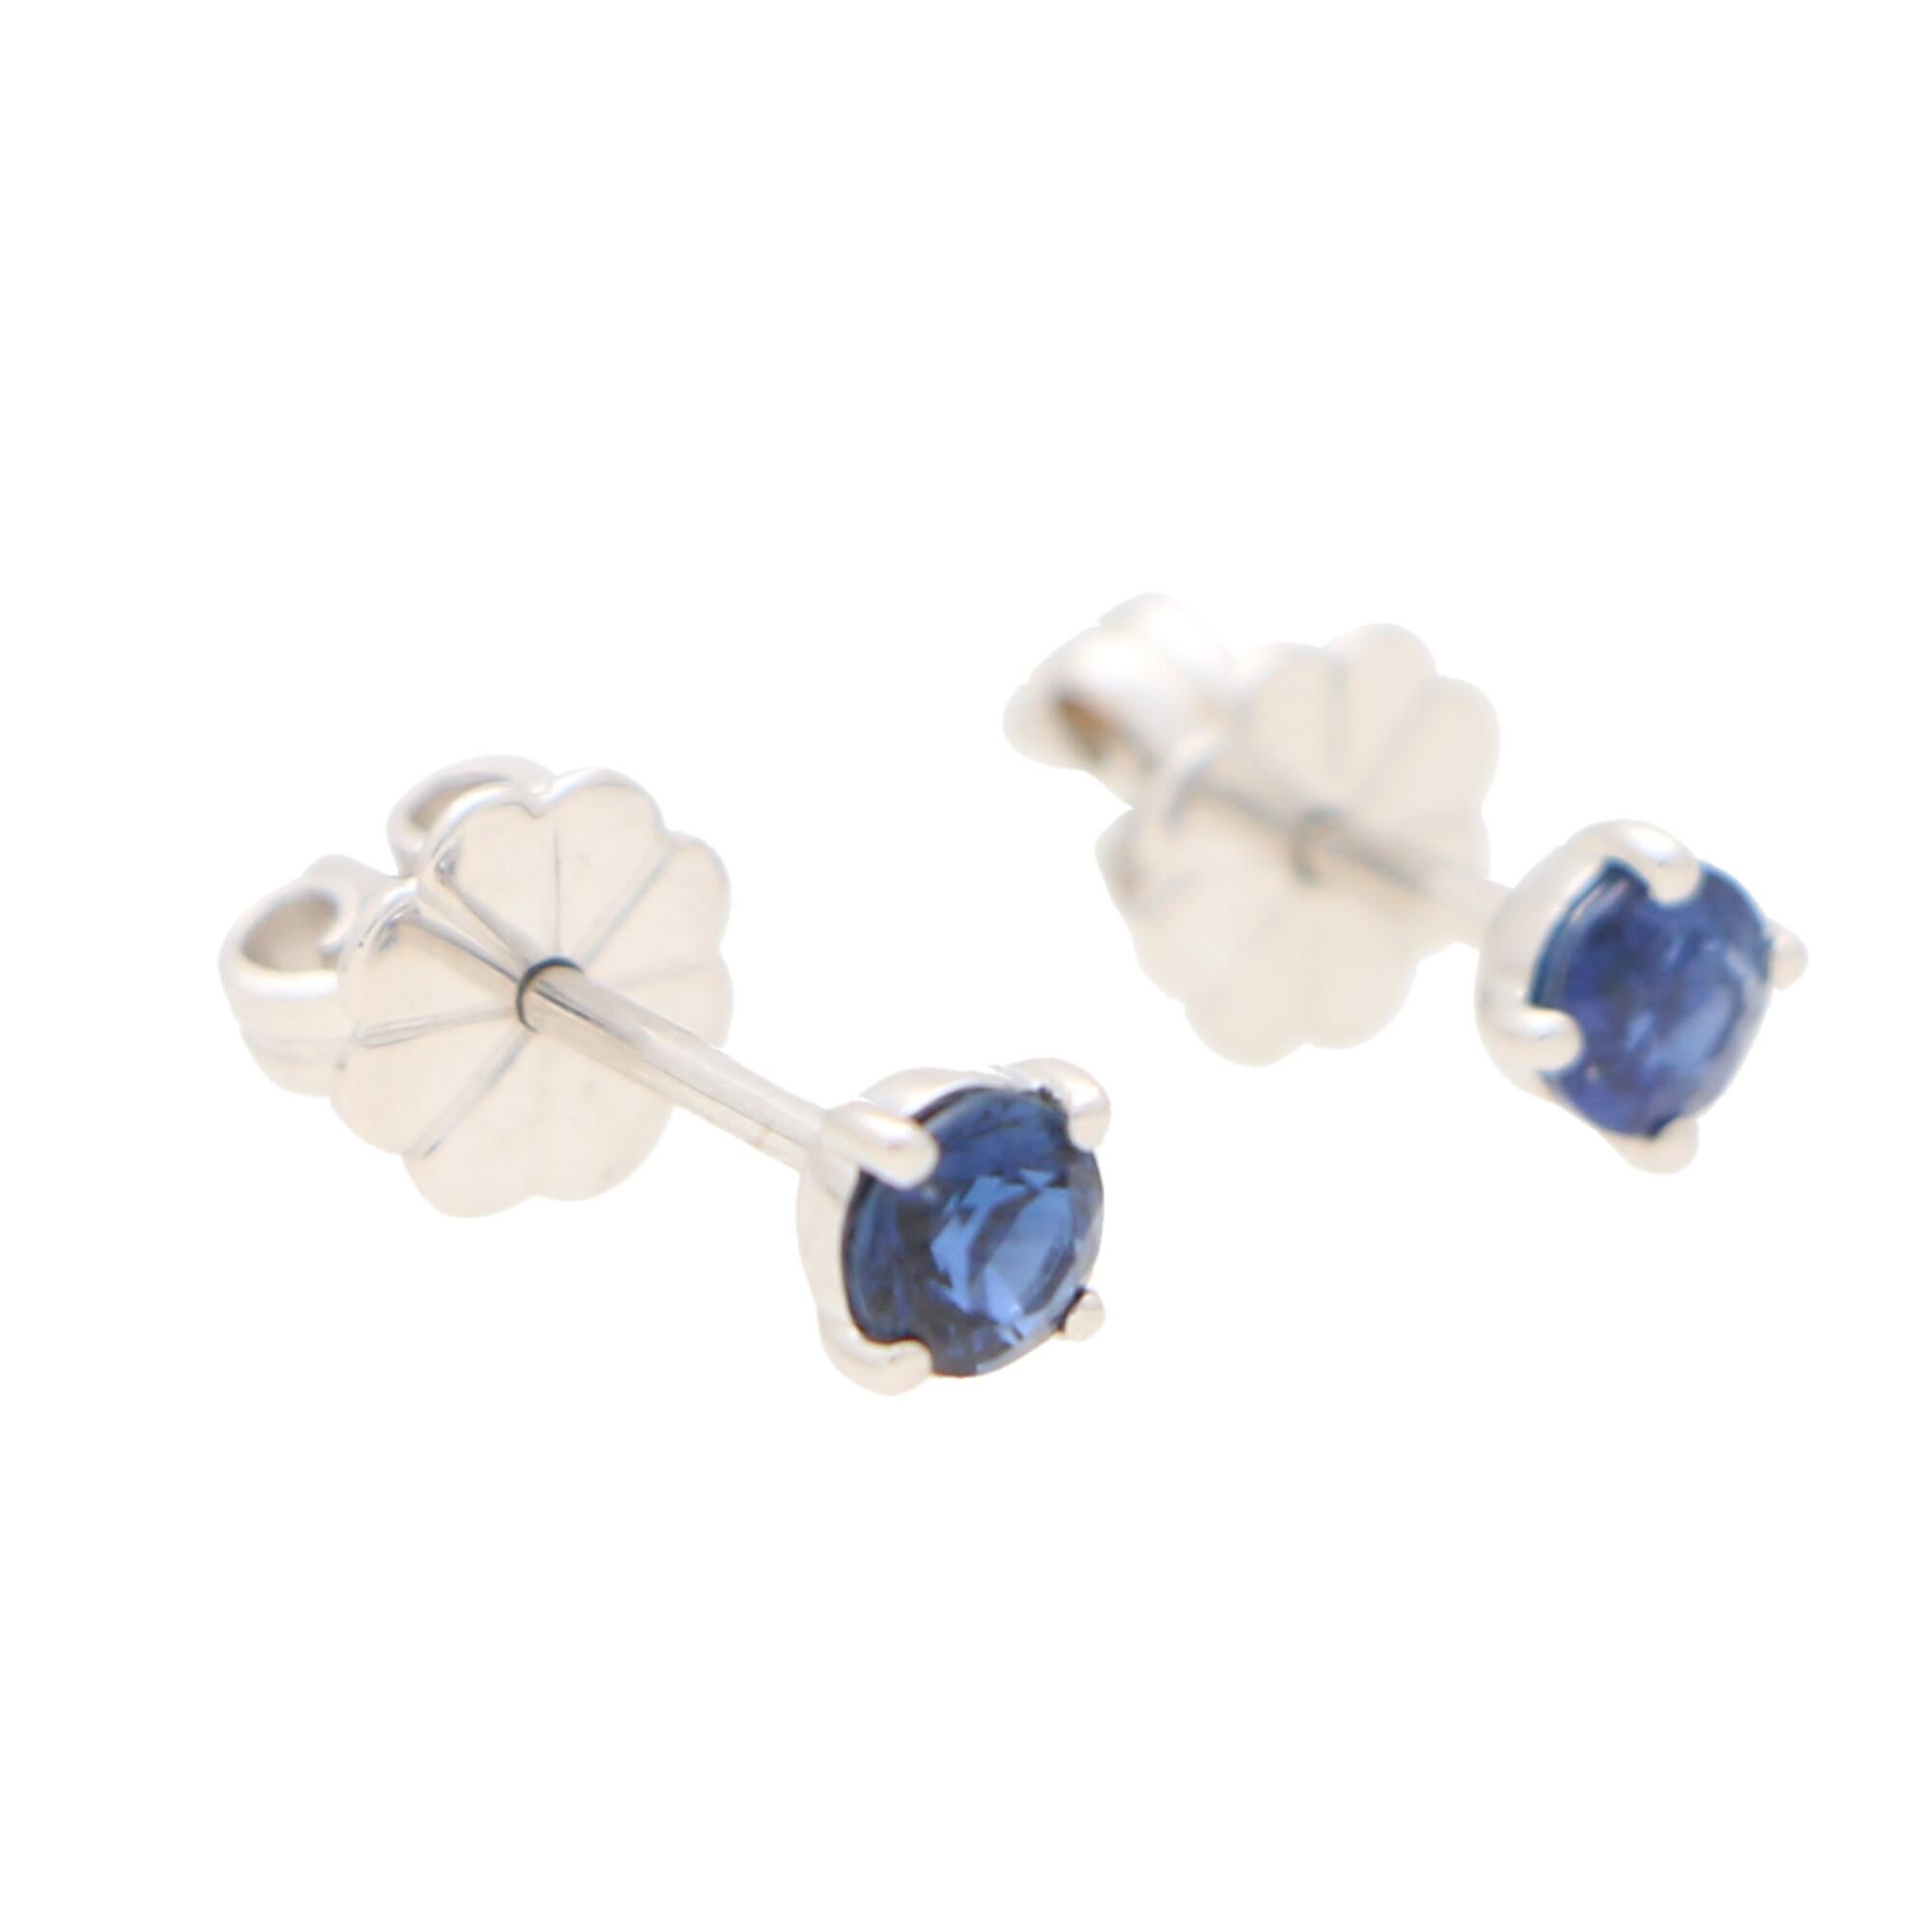 Women's or Men's Interchangeable Ruby, Sapphire, Diamond and Pearl Stud Floral Earrings in Gold